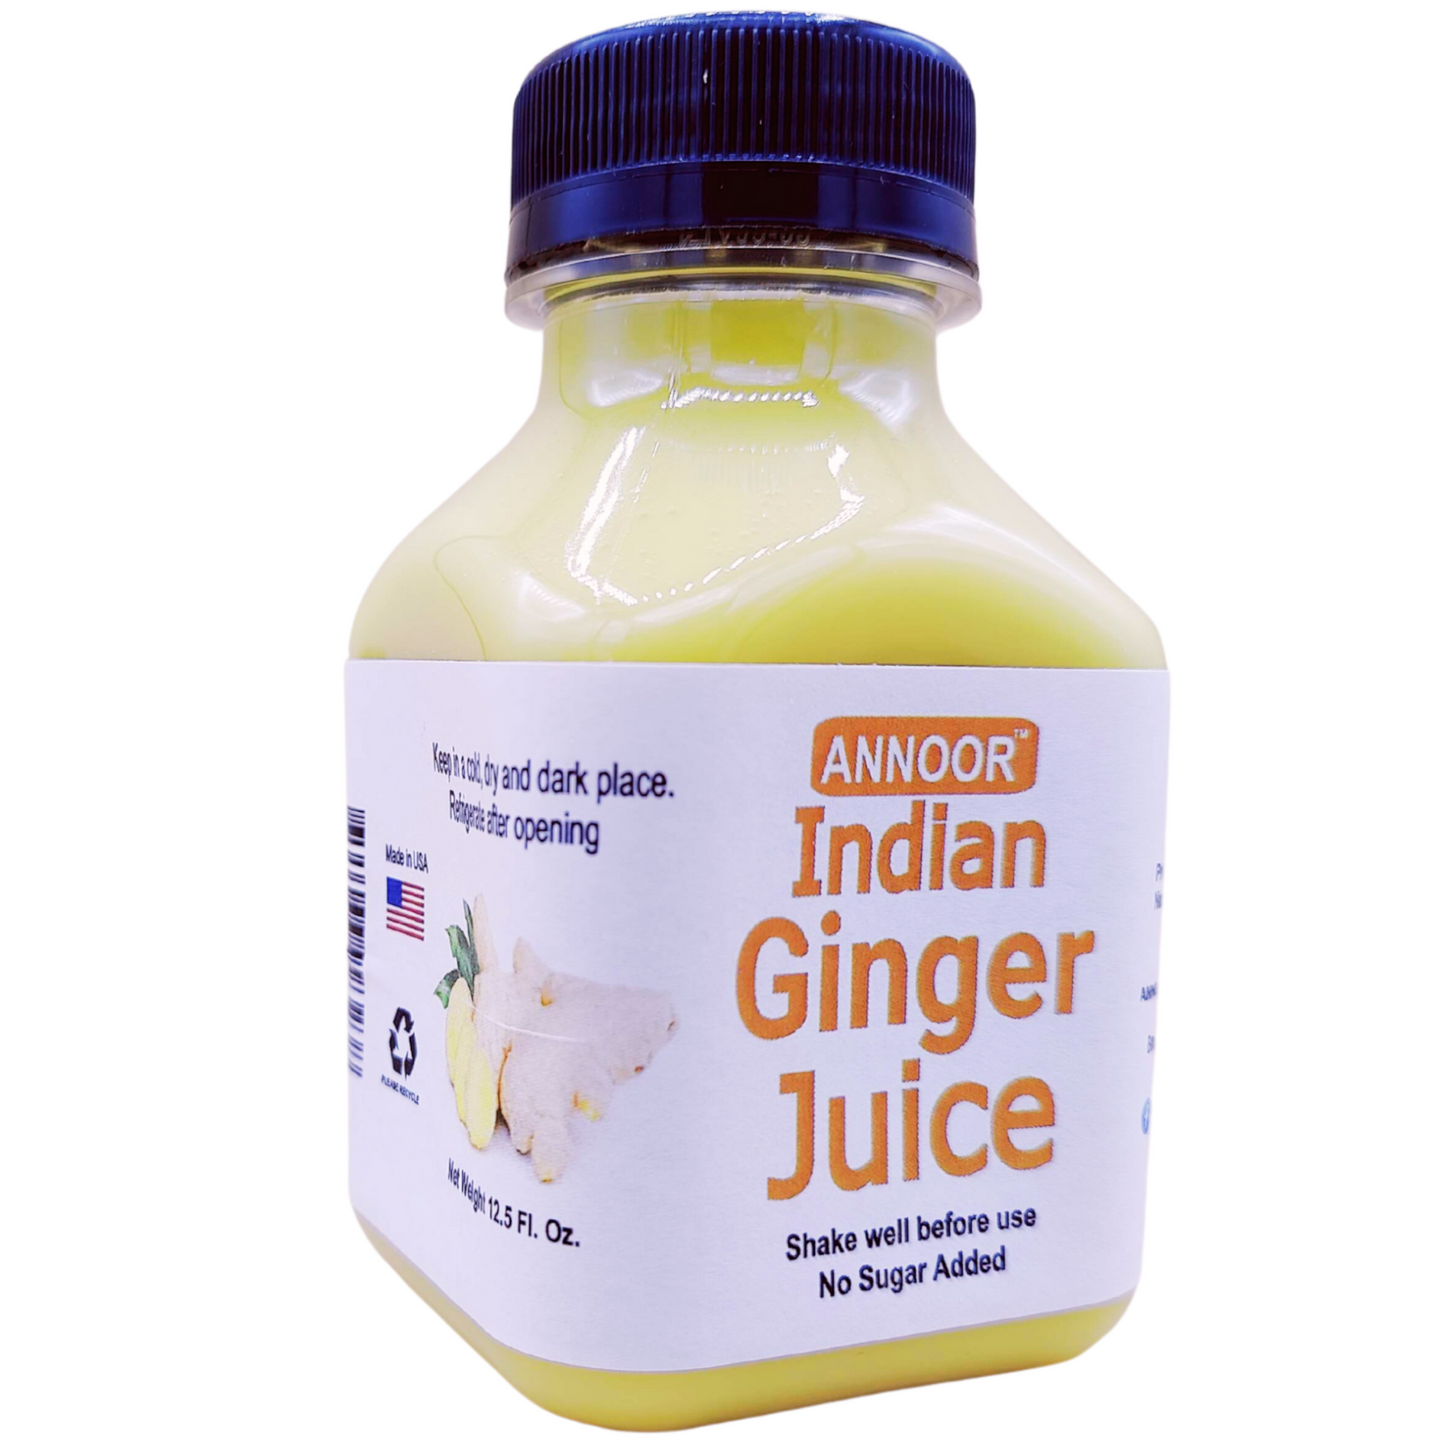 Organic Ginger Juice by Annoor | 32/8.5 Fl Oz | NFC | Raw, Strong, Concentrate and No pulp. Use for Spicy, Zesty & warming kick, Soothing & refreshing ginger tea, marinade, sauces, refreshing lemonade